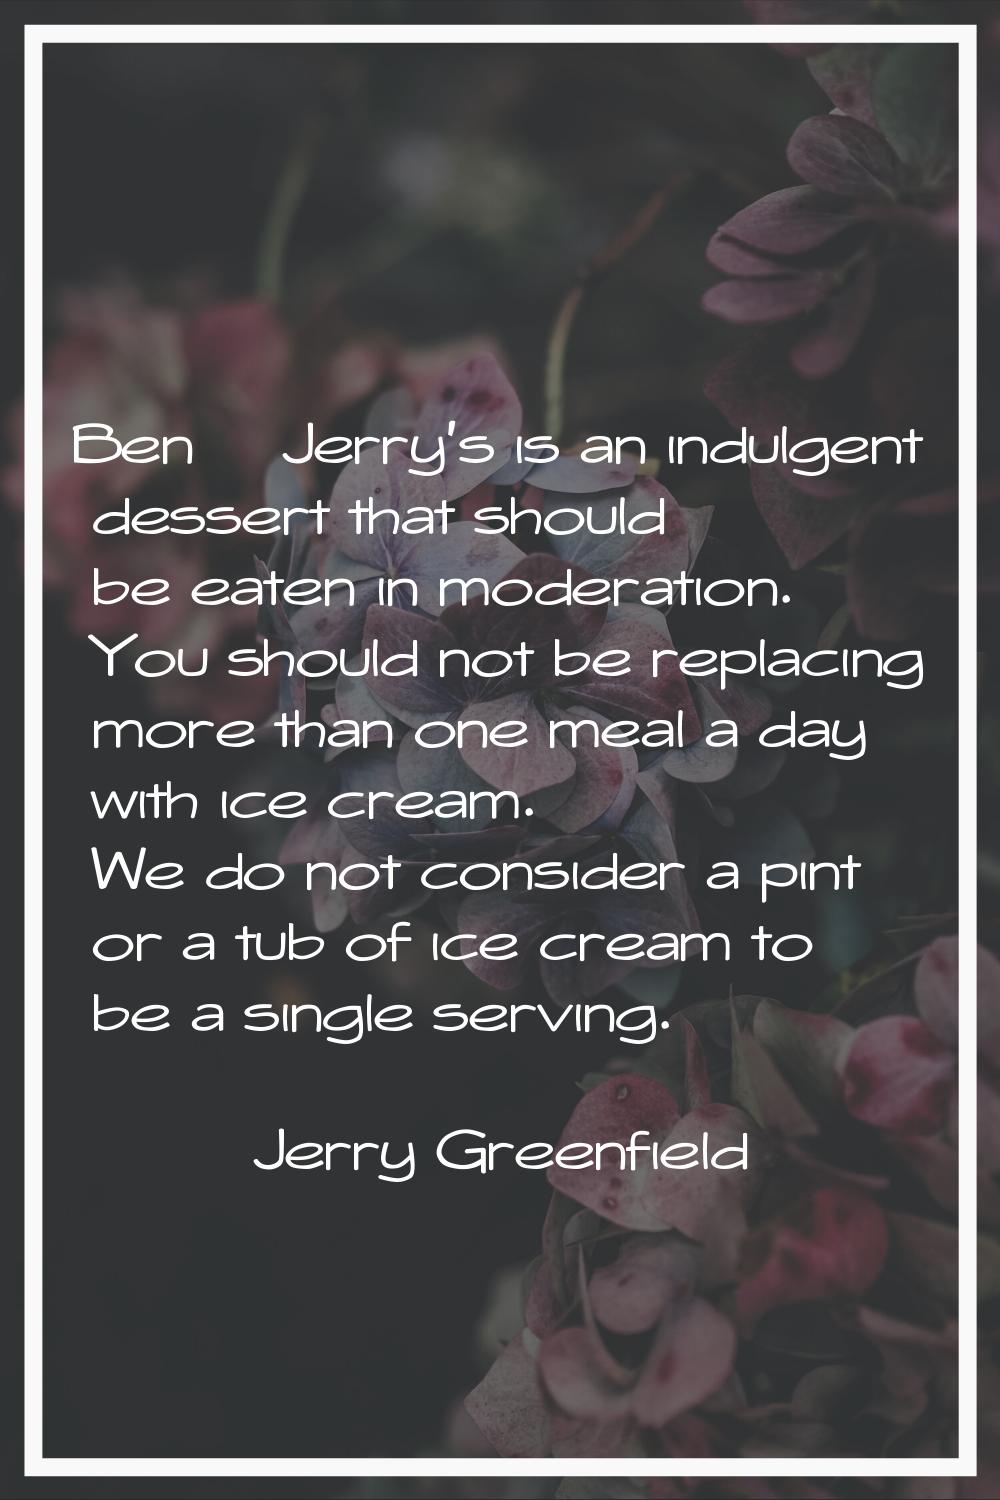 Ben & Jerry's is an indulgent dessert that should be eaten in moderation. You should not be replaci